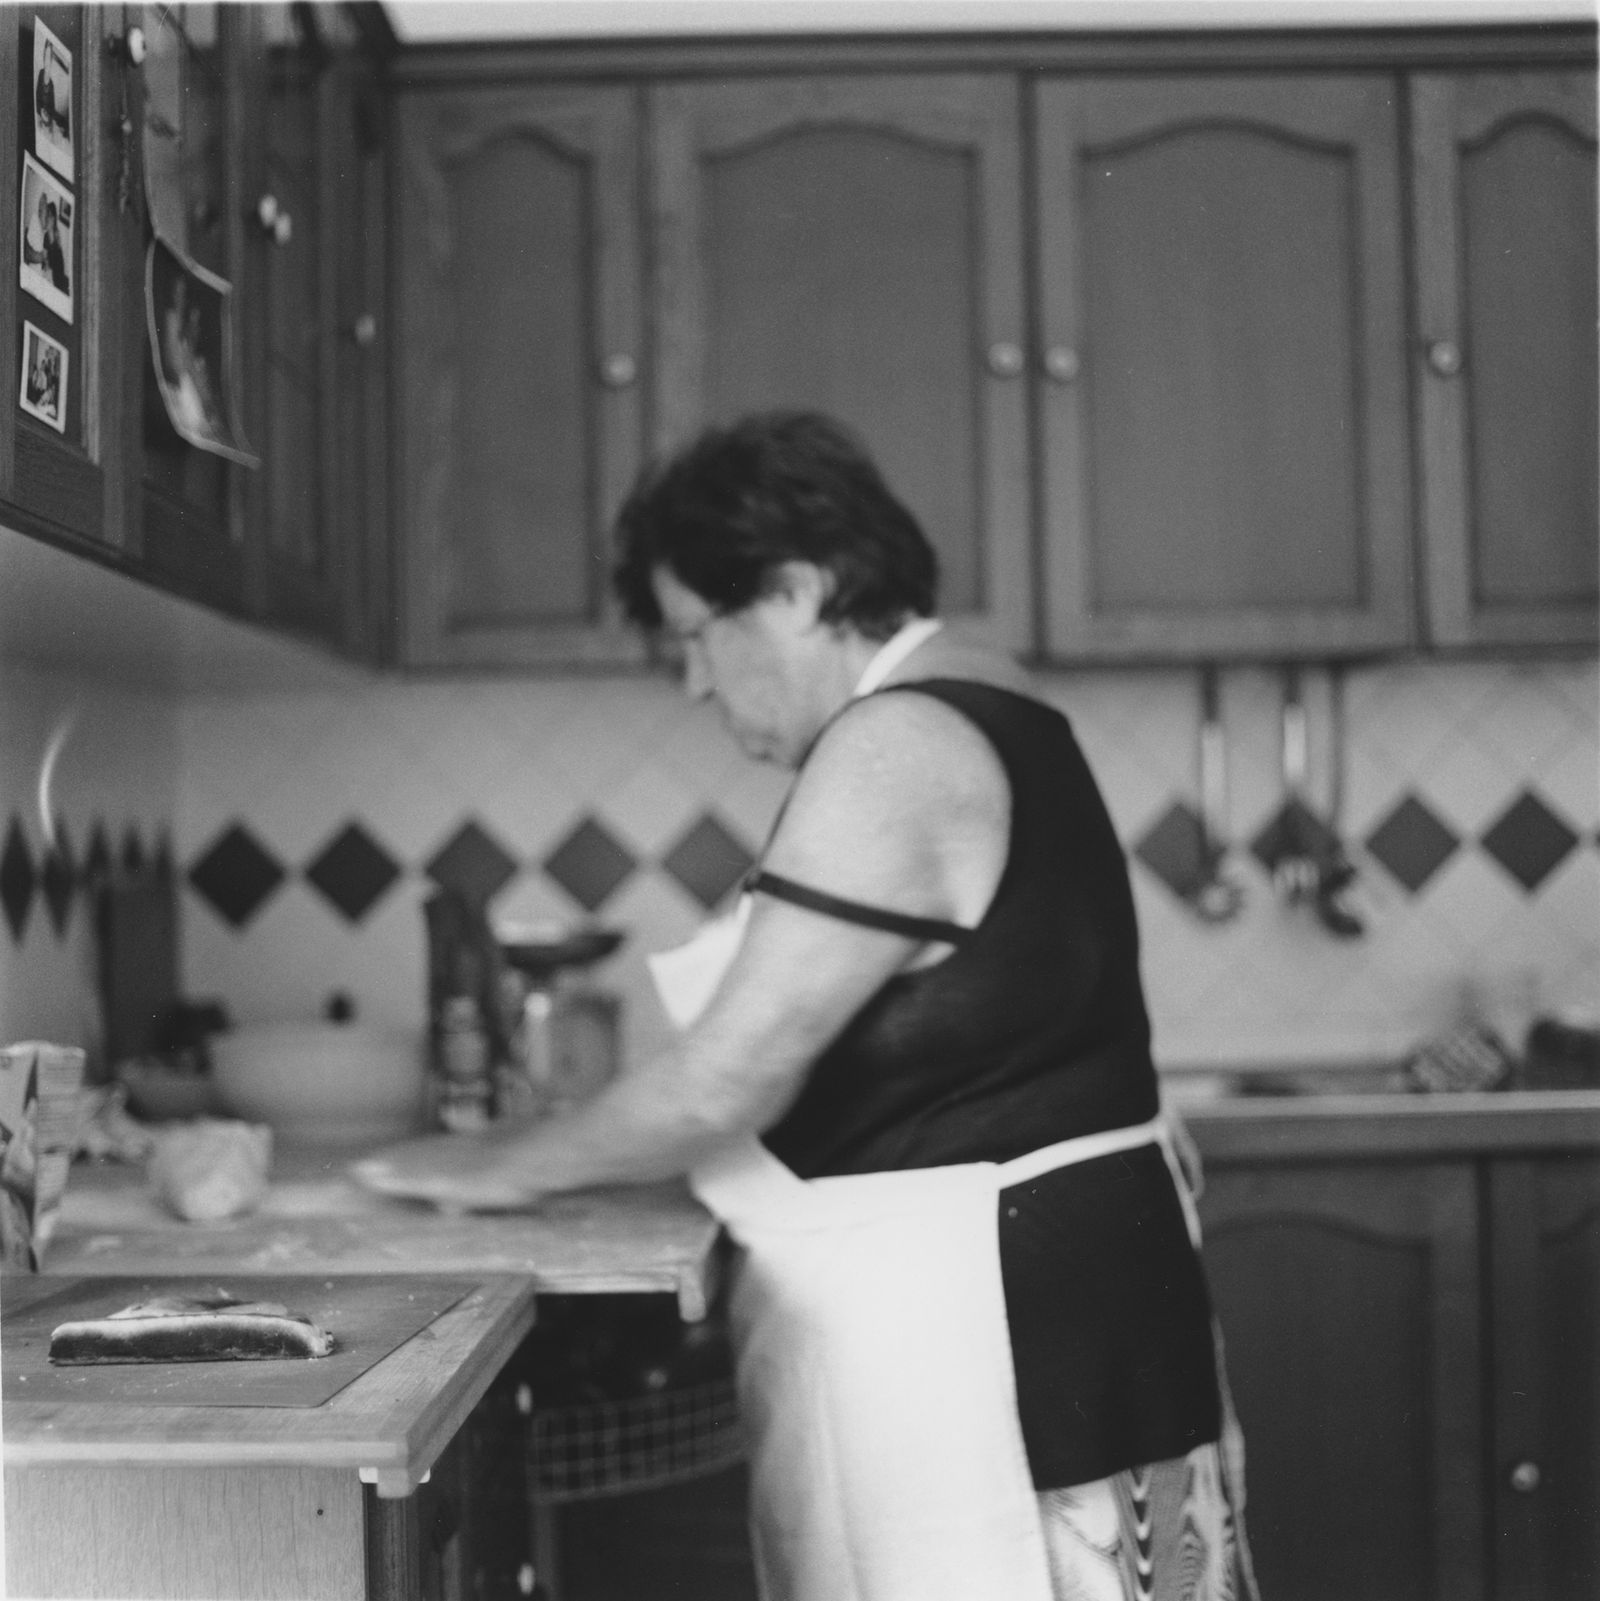 © NICOLE MARCHI - my grandmother while cooking (2018)